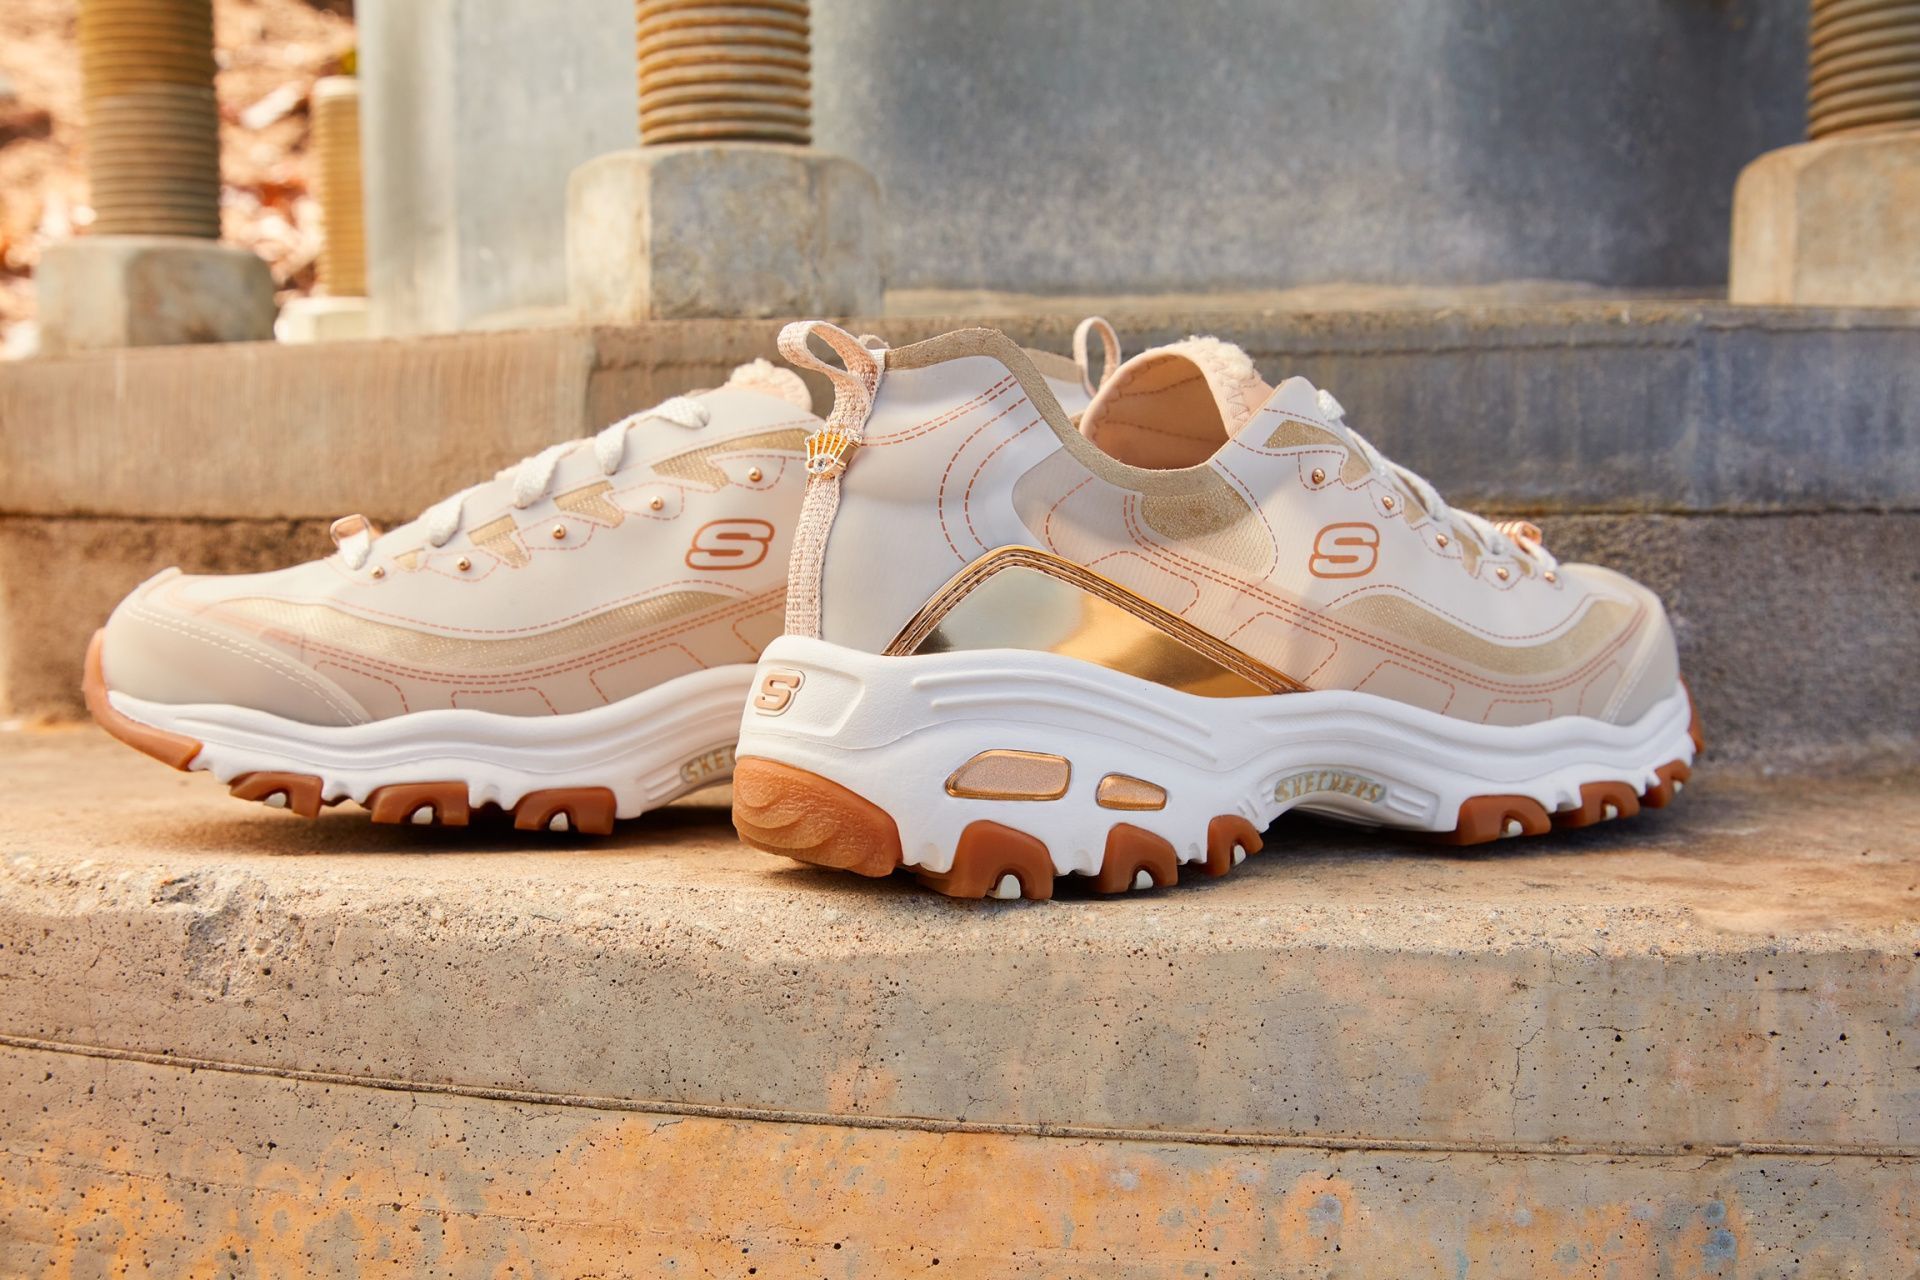 limpiar exprimir Contagioso Skechers unveils a "delicate" collection of sneakers with fringes, rivets  and chains